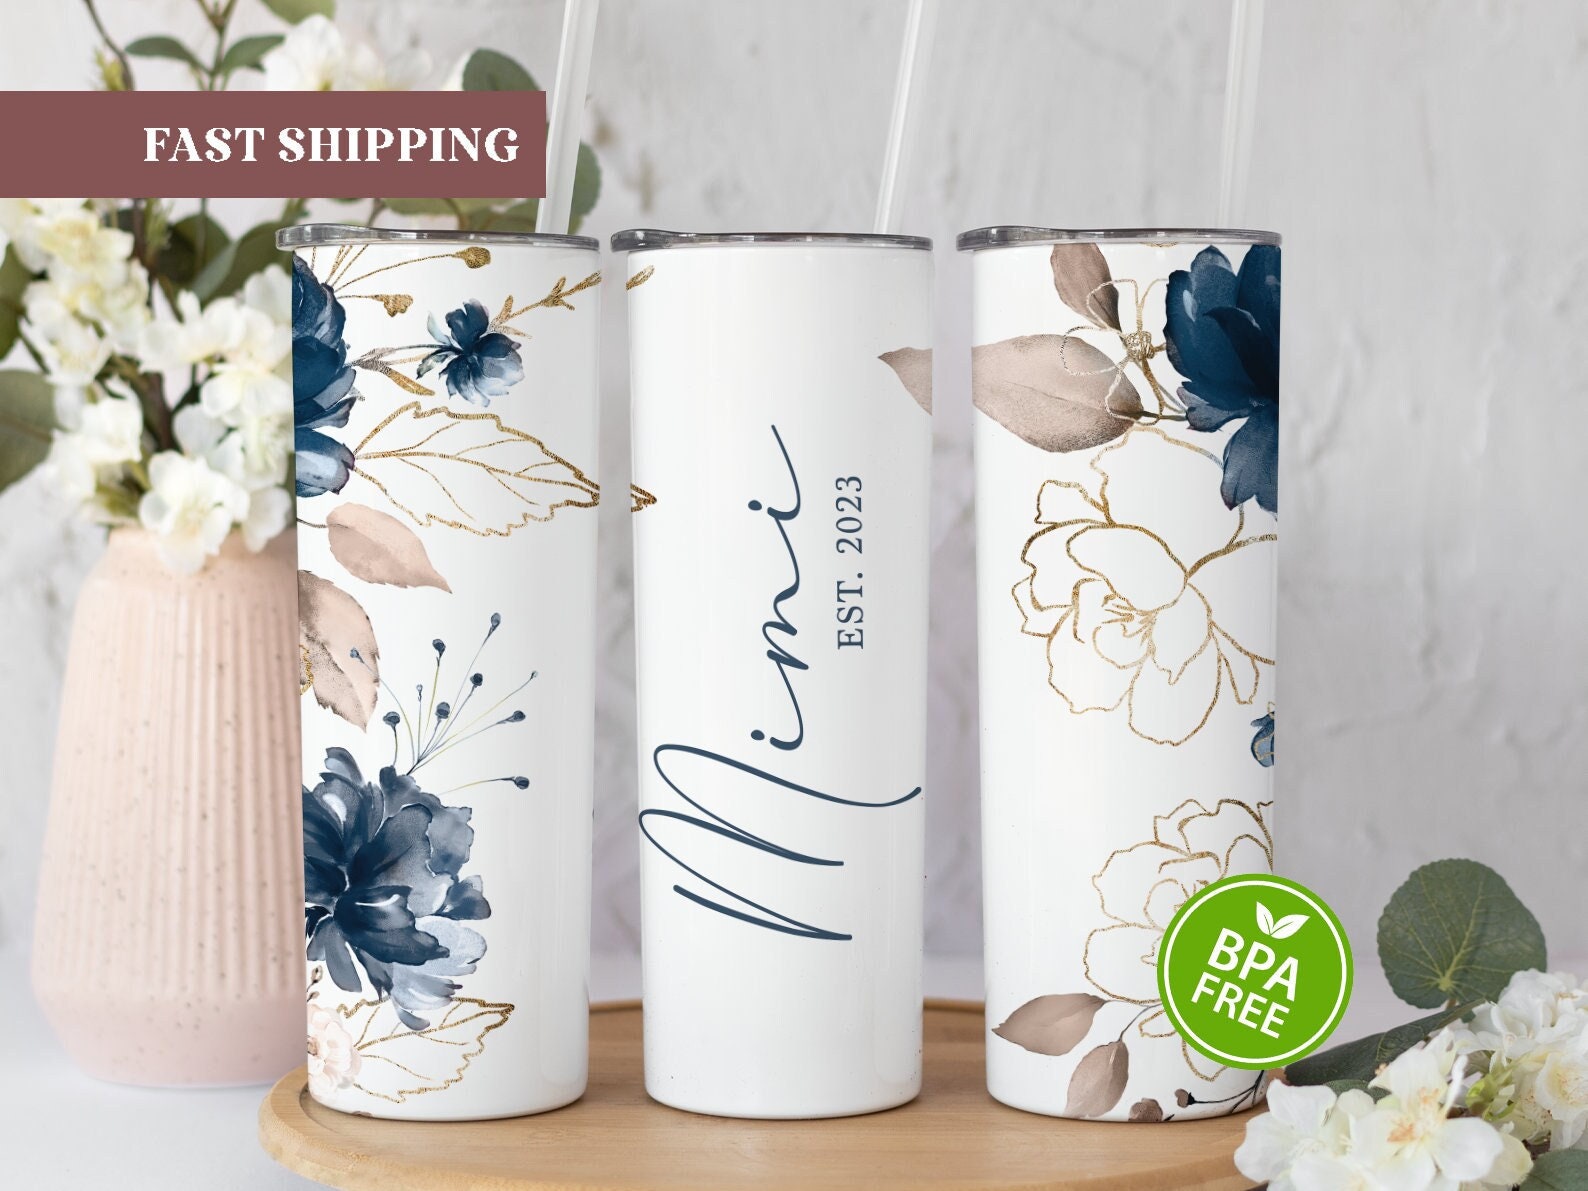 20 oz MIMI sublimation tumblers! Choose your Design. FREE shipping!